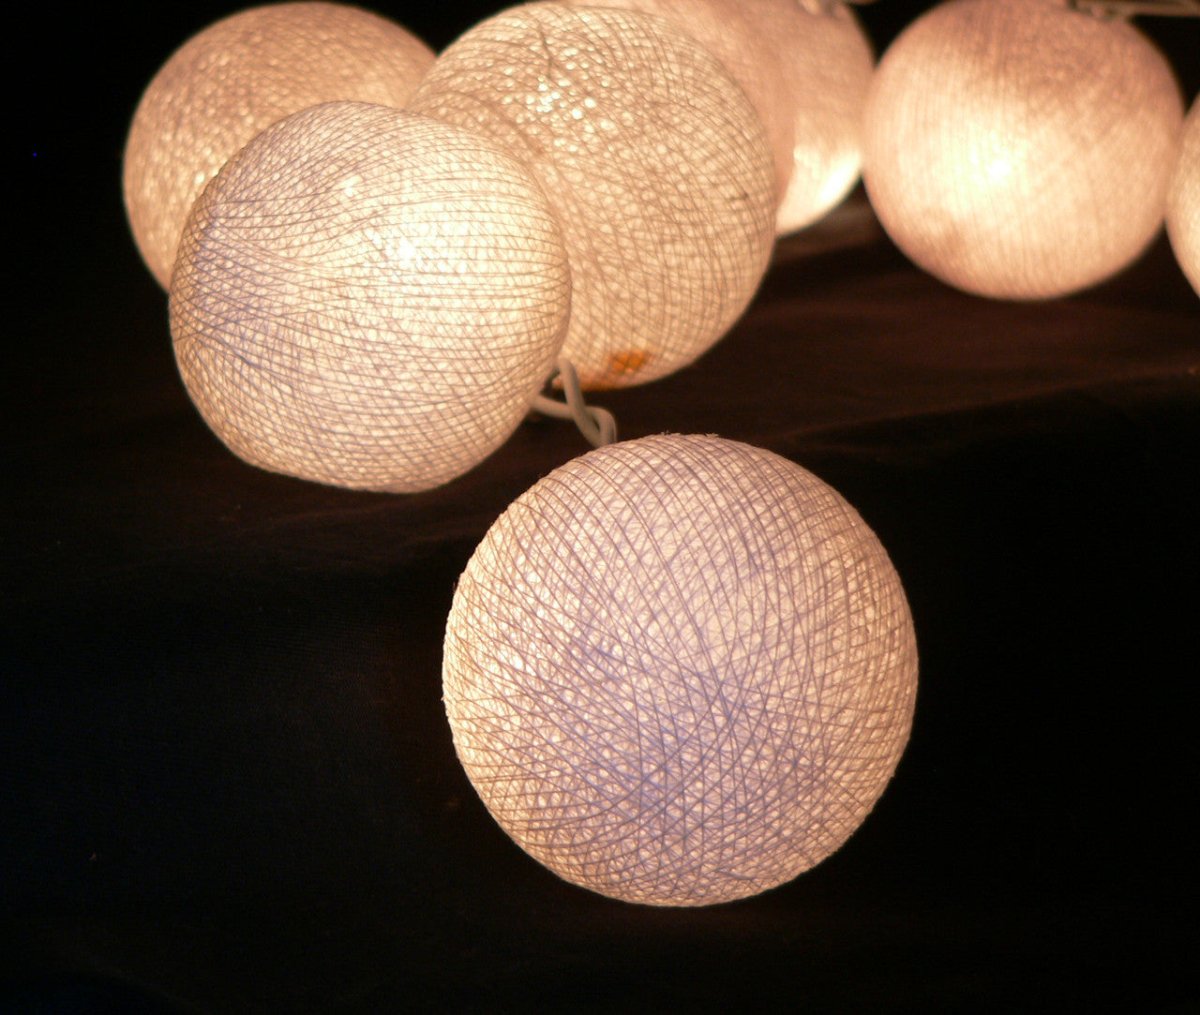 Set of 20 LED White Cotton Ball String Lights. Ideal for Christmas, Wedding, Party, Indoor &amp; Outdoor Decoration - Outdoorium